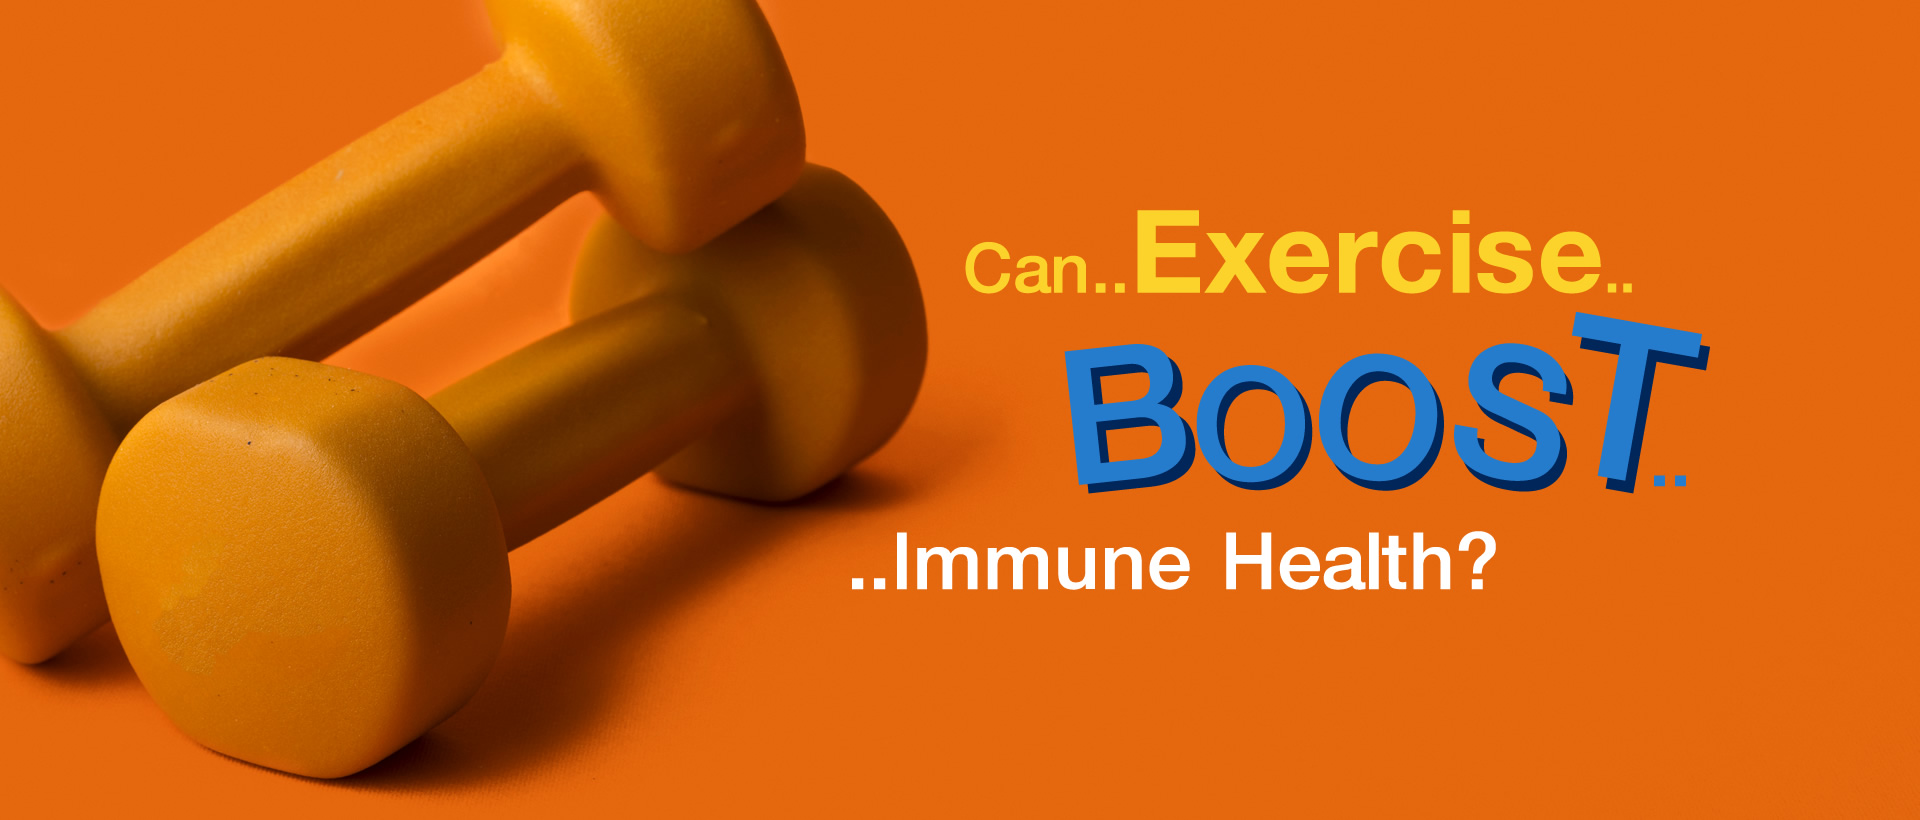 Can exercise boost immune health?